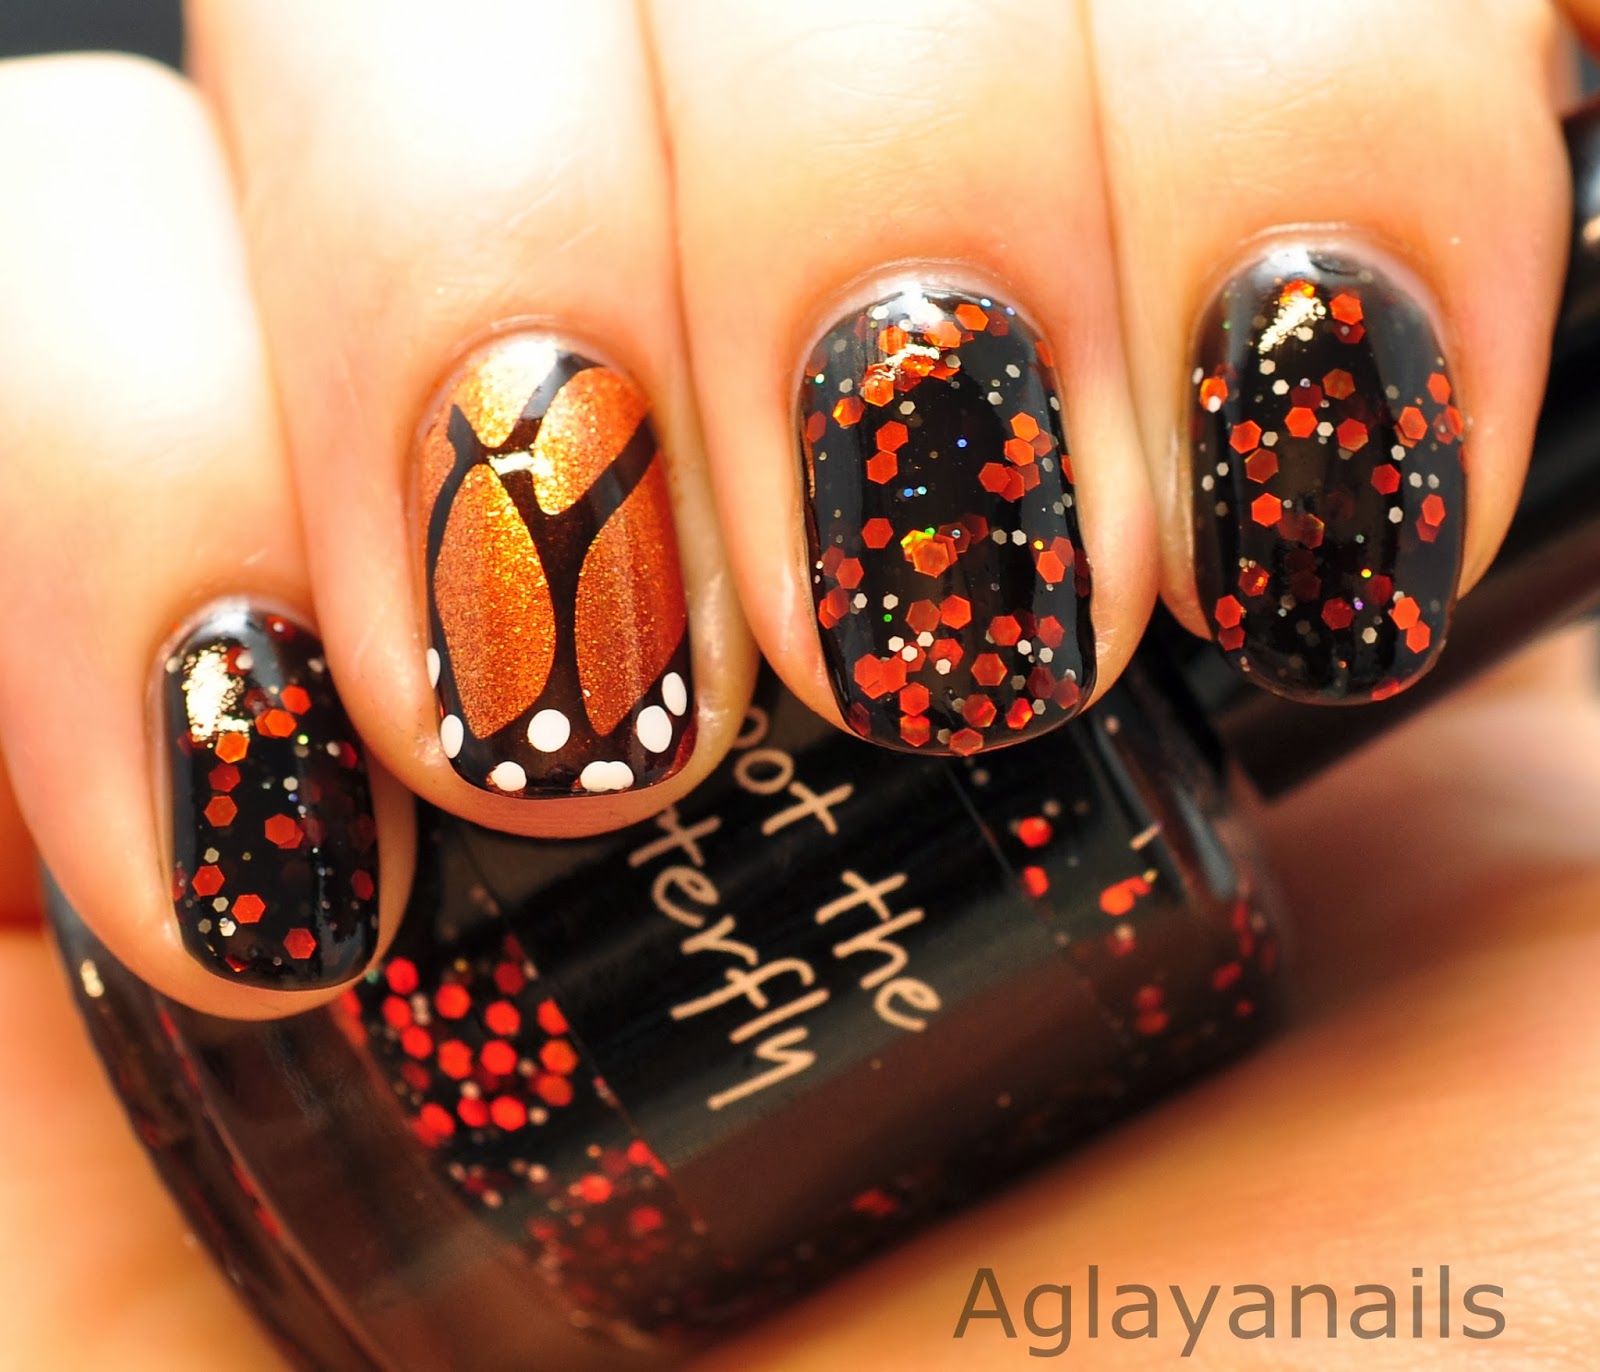 Aglayanails: Shoot The Butterfly